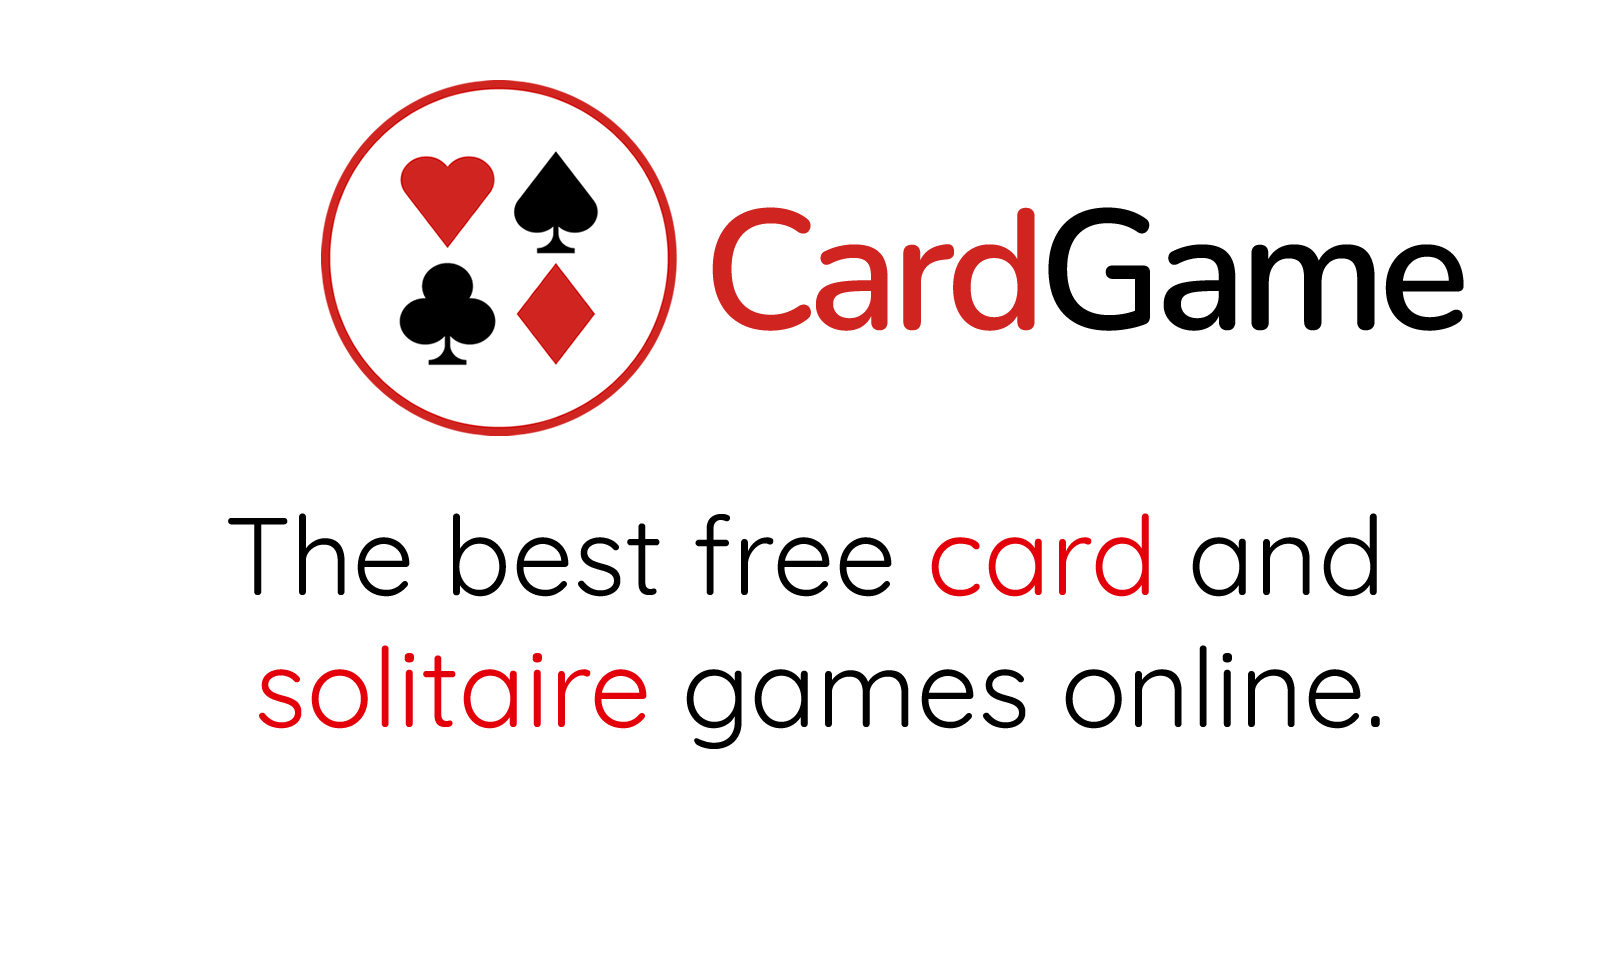  Play Free Classic Solitaire Card Games Online With